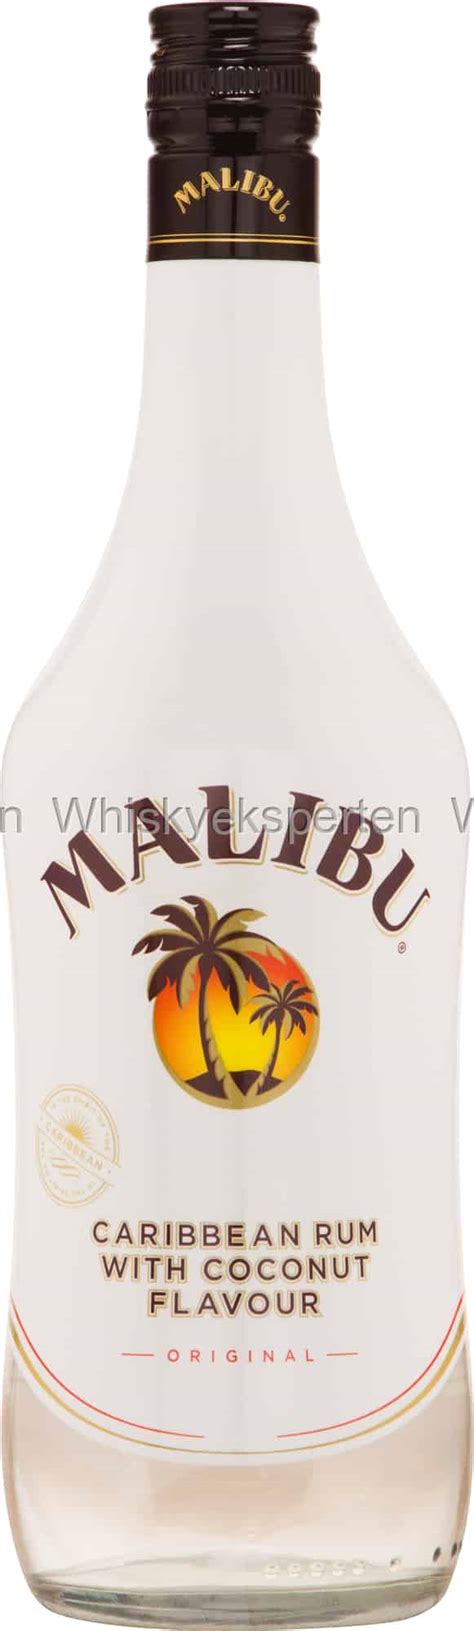 Fill your highball glass with crushed ice. Malibu | Caribbean Rum With Coconut Flavour